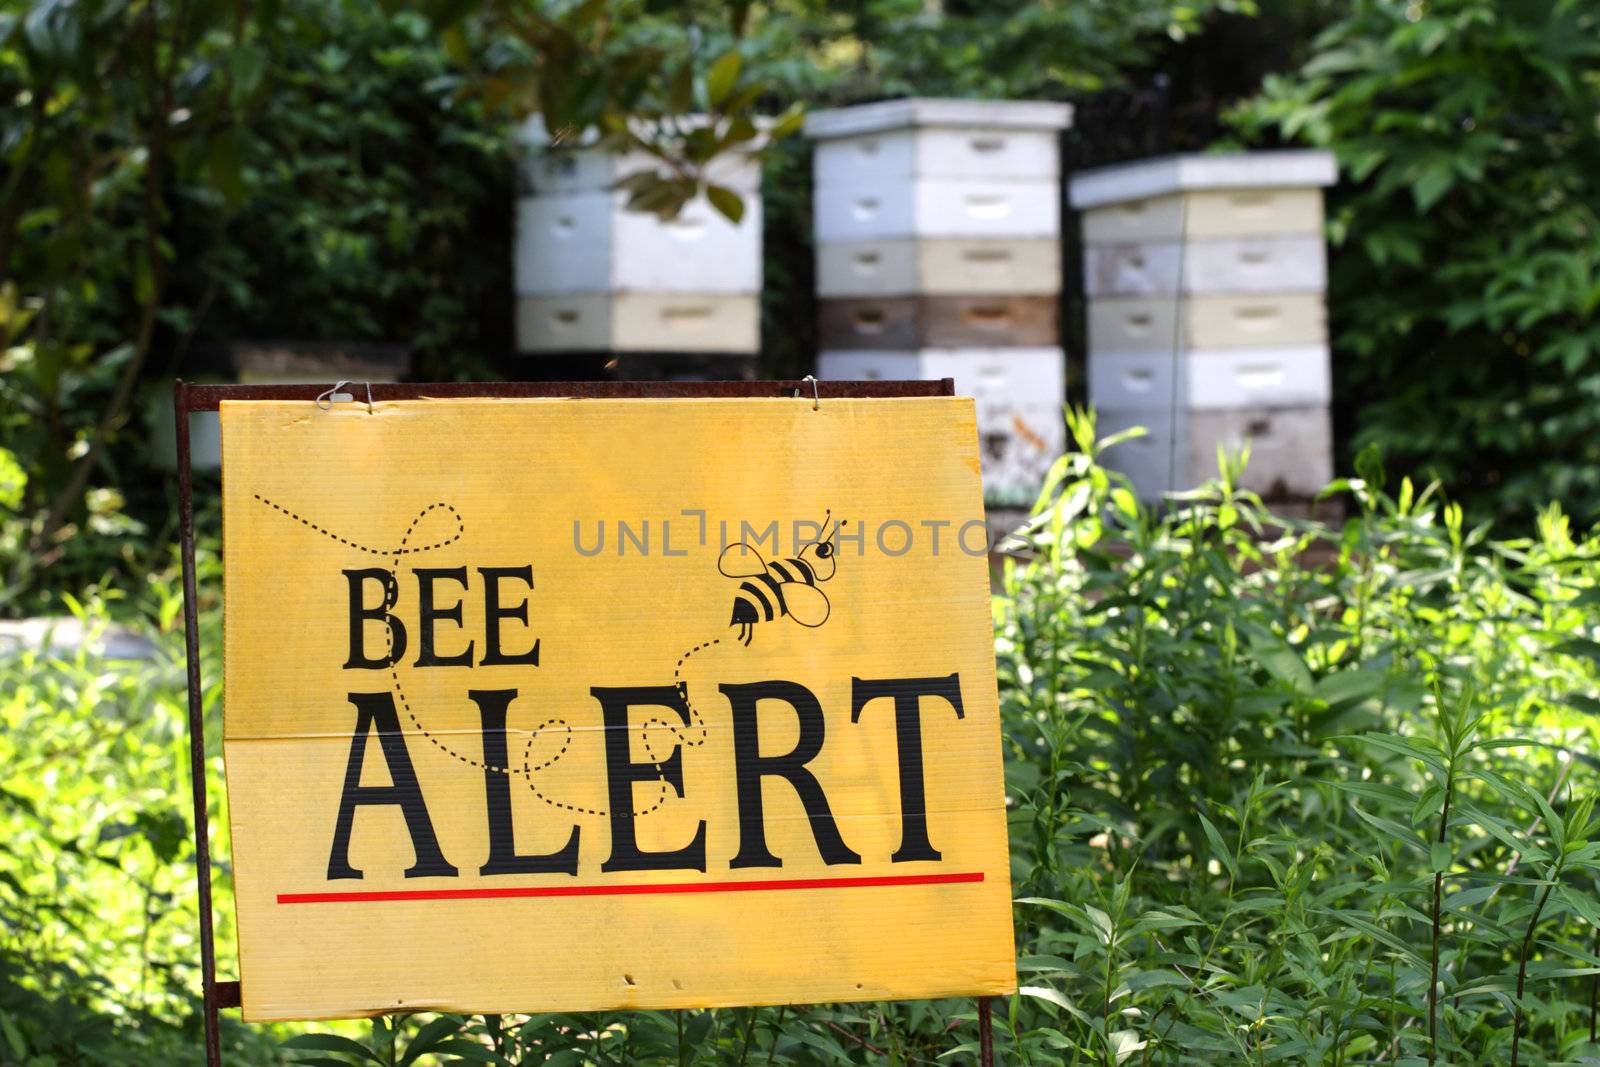 A bee awareness sign in front of bee hives.